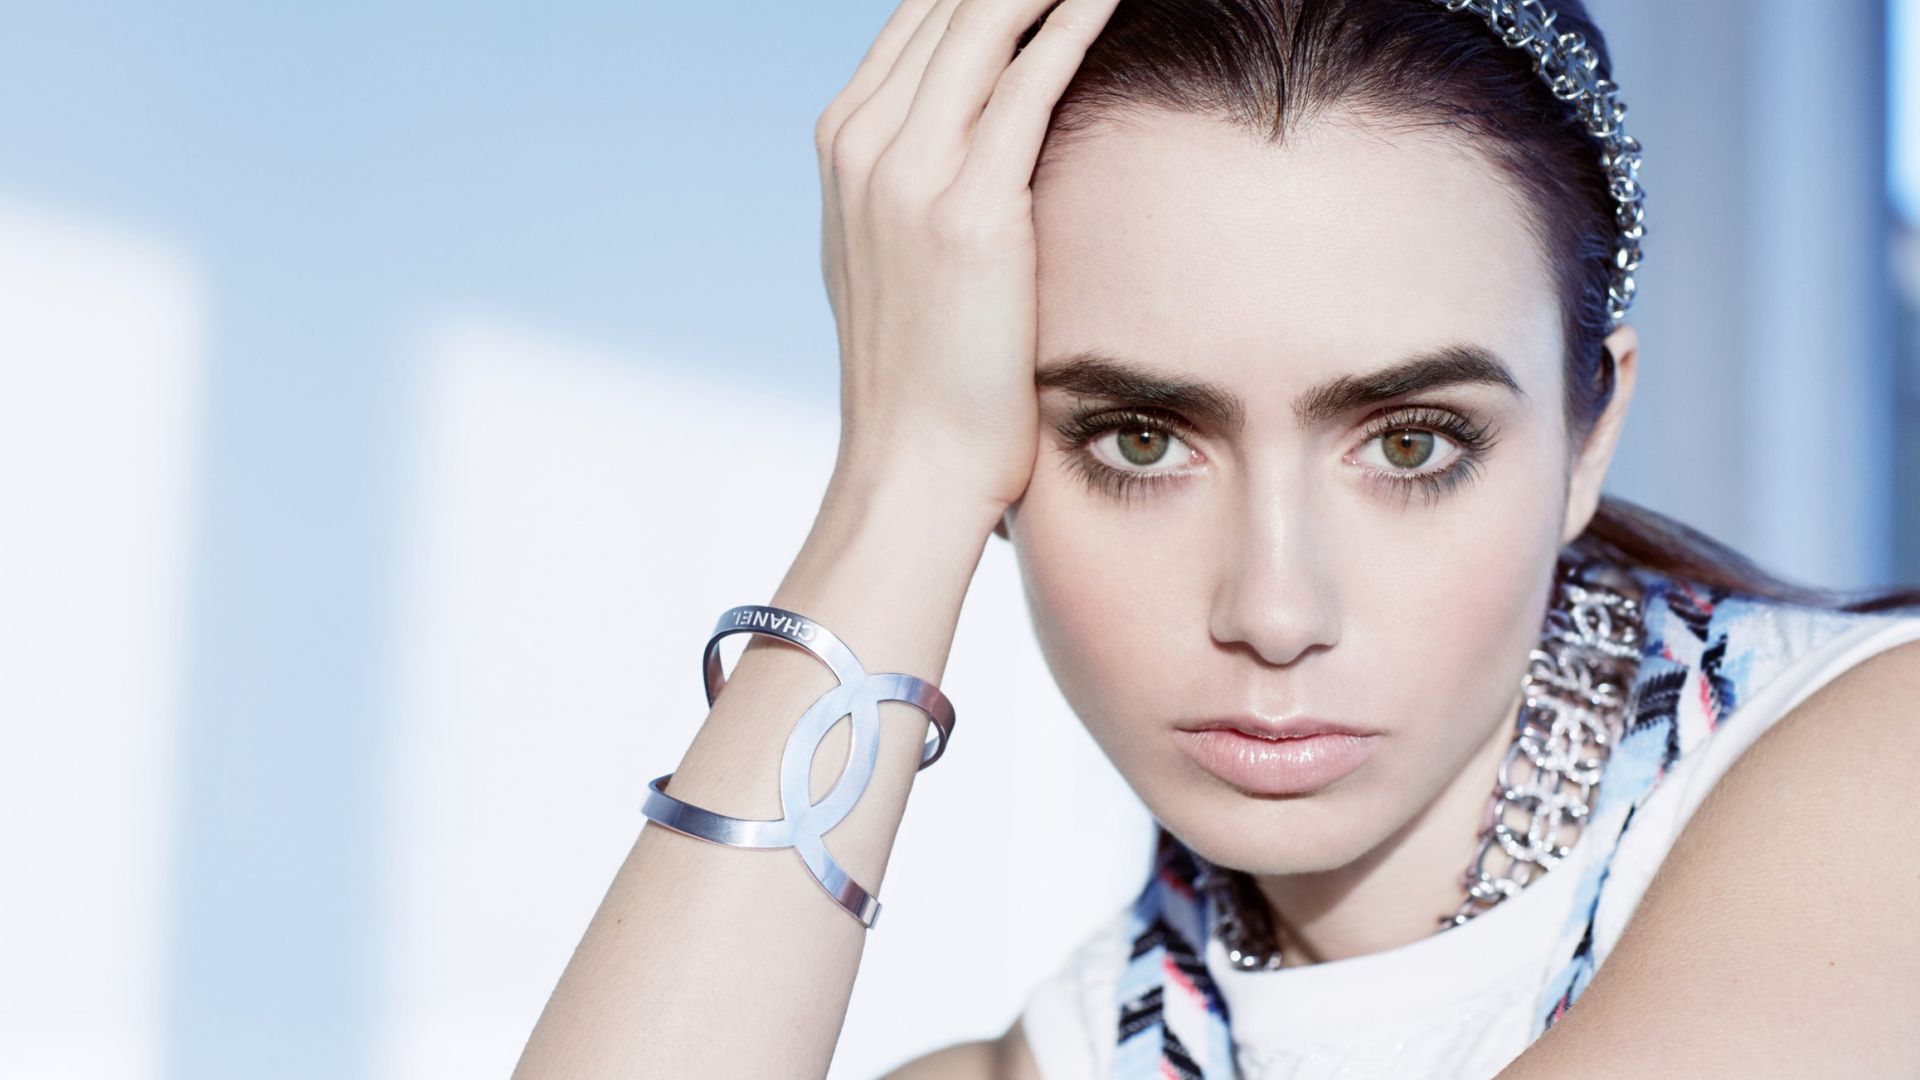 Cute Lily Collins Wallpapers